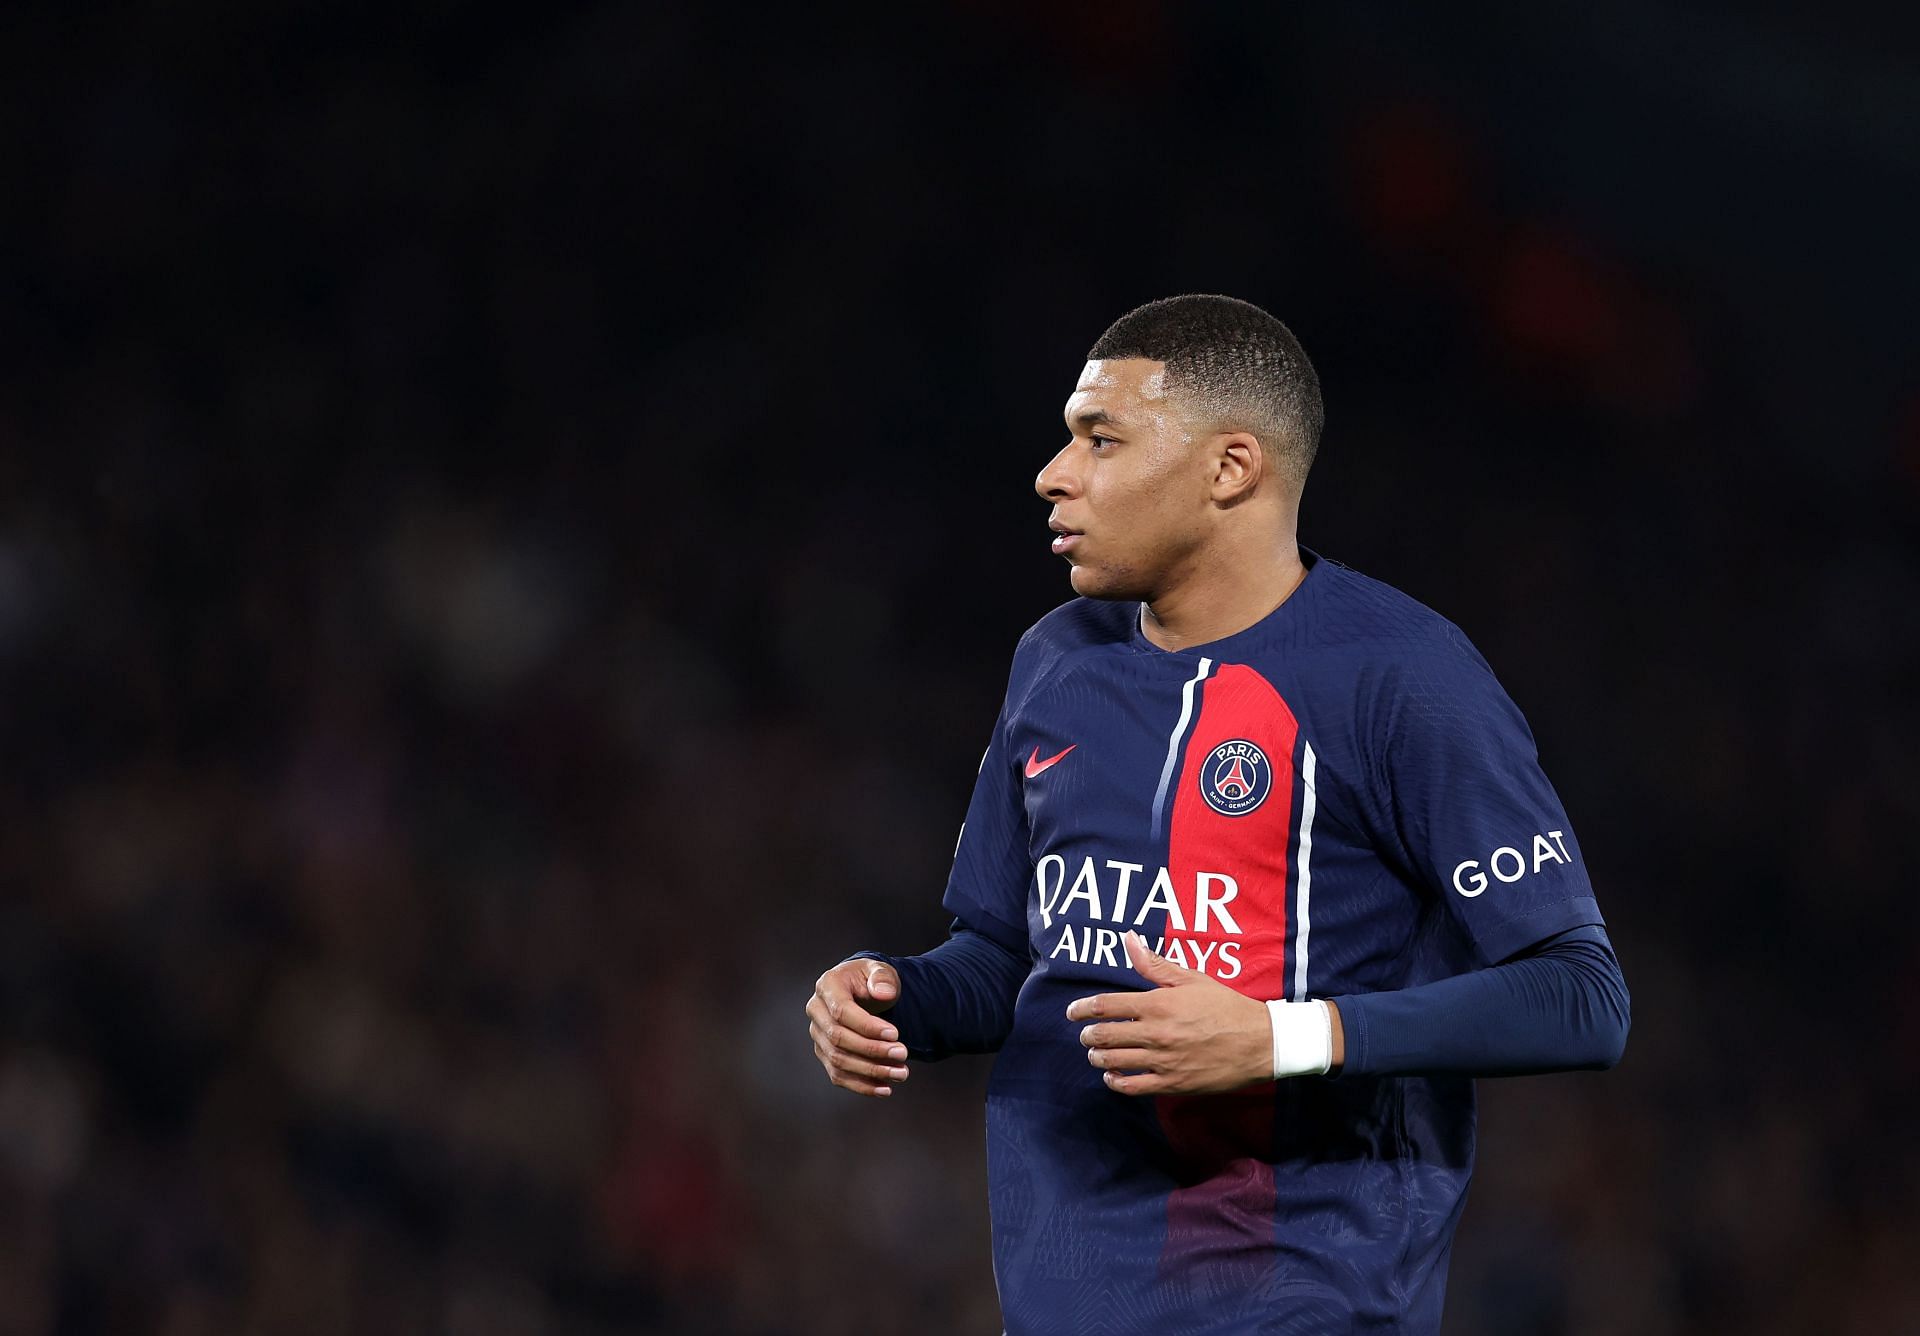 Kylian Mbappe has admirers at Old Trafford